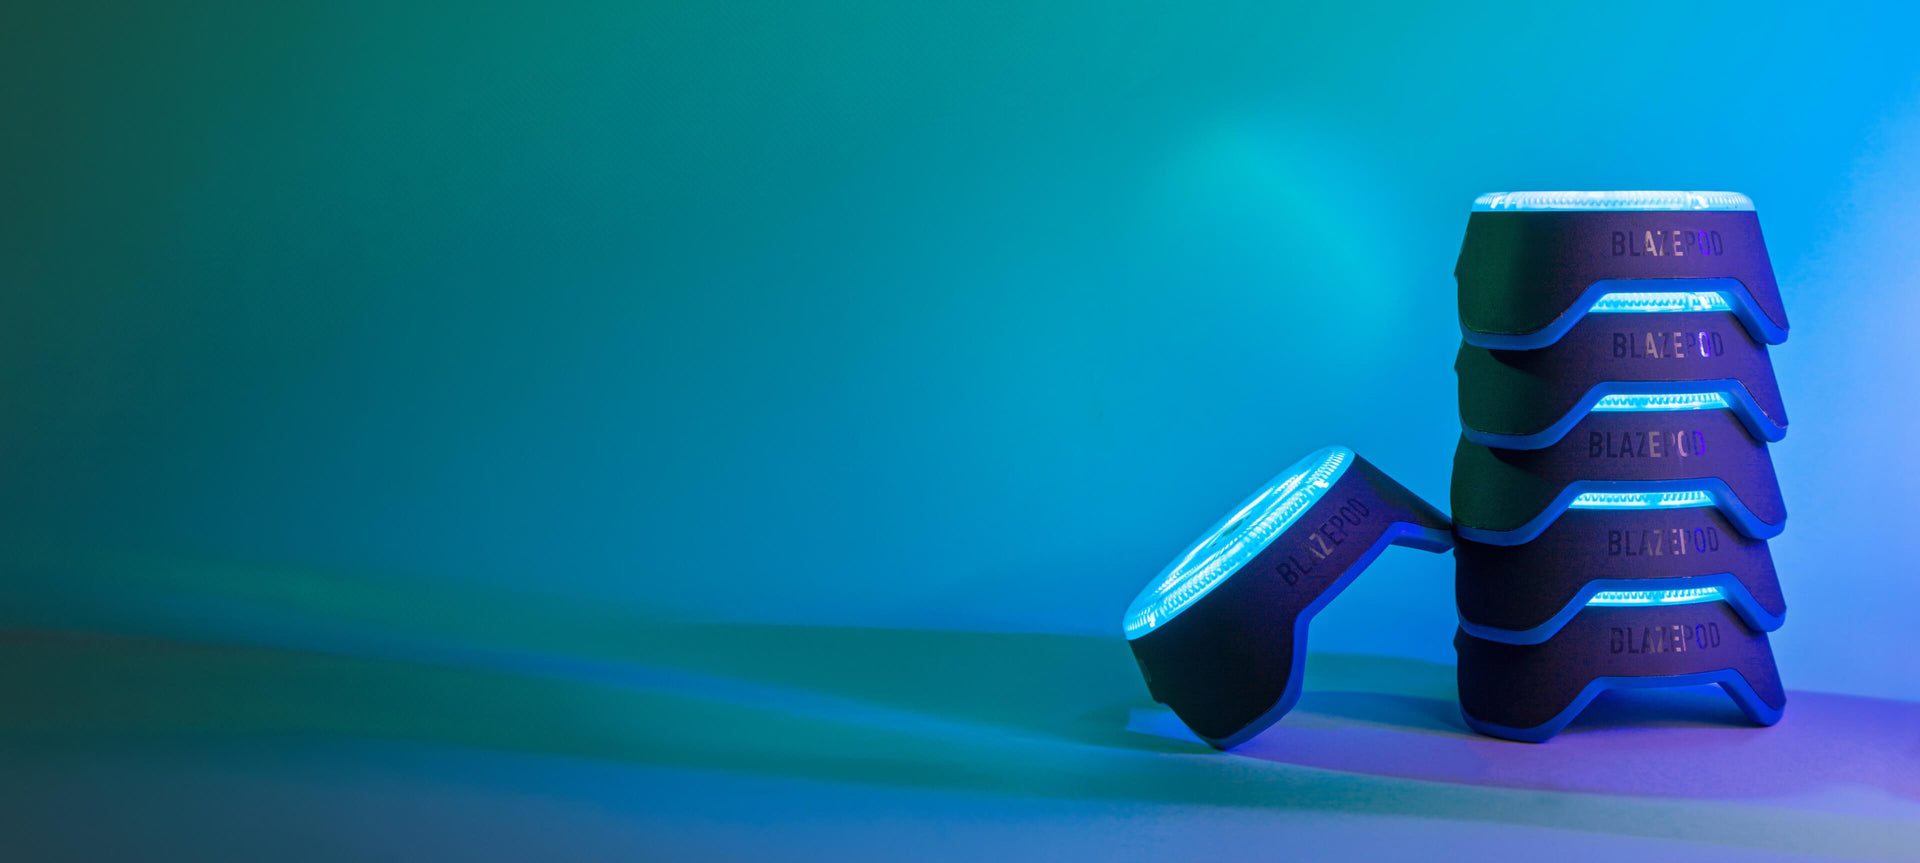 Improve Reaction Times, Speed & Agility with BlazePod LED Light Pod -  Biometric Sports Solutions